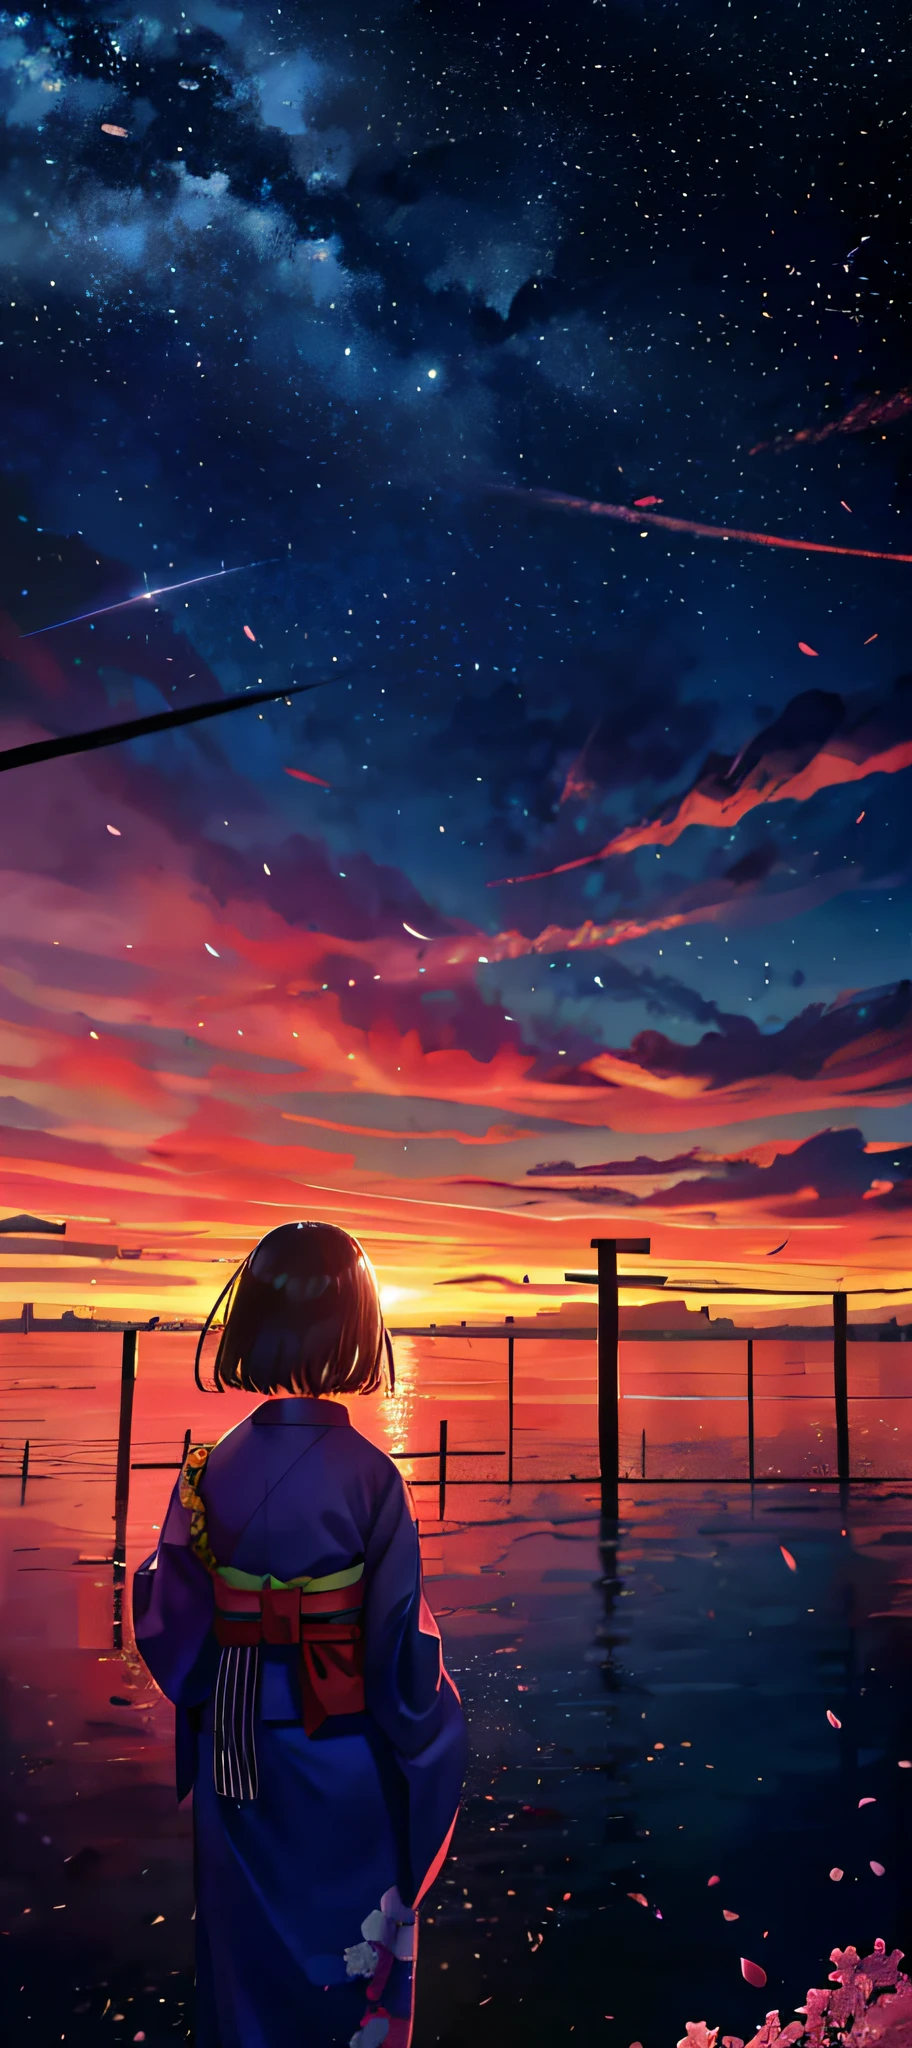 1girl, a distant girl kiss girl in a kimono gazing at the stars, (zoomed: 1.1), (meteor shower: 1.2), (comet: 1.1), your name, low angle, from behind, Northern Lights, meteors, yukata, red kimono, cherry blossoms, standing in the field, best quality, masterpiece, clouds, colorful, starry, stars,